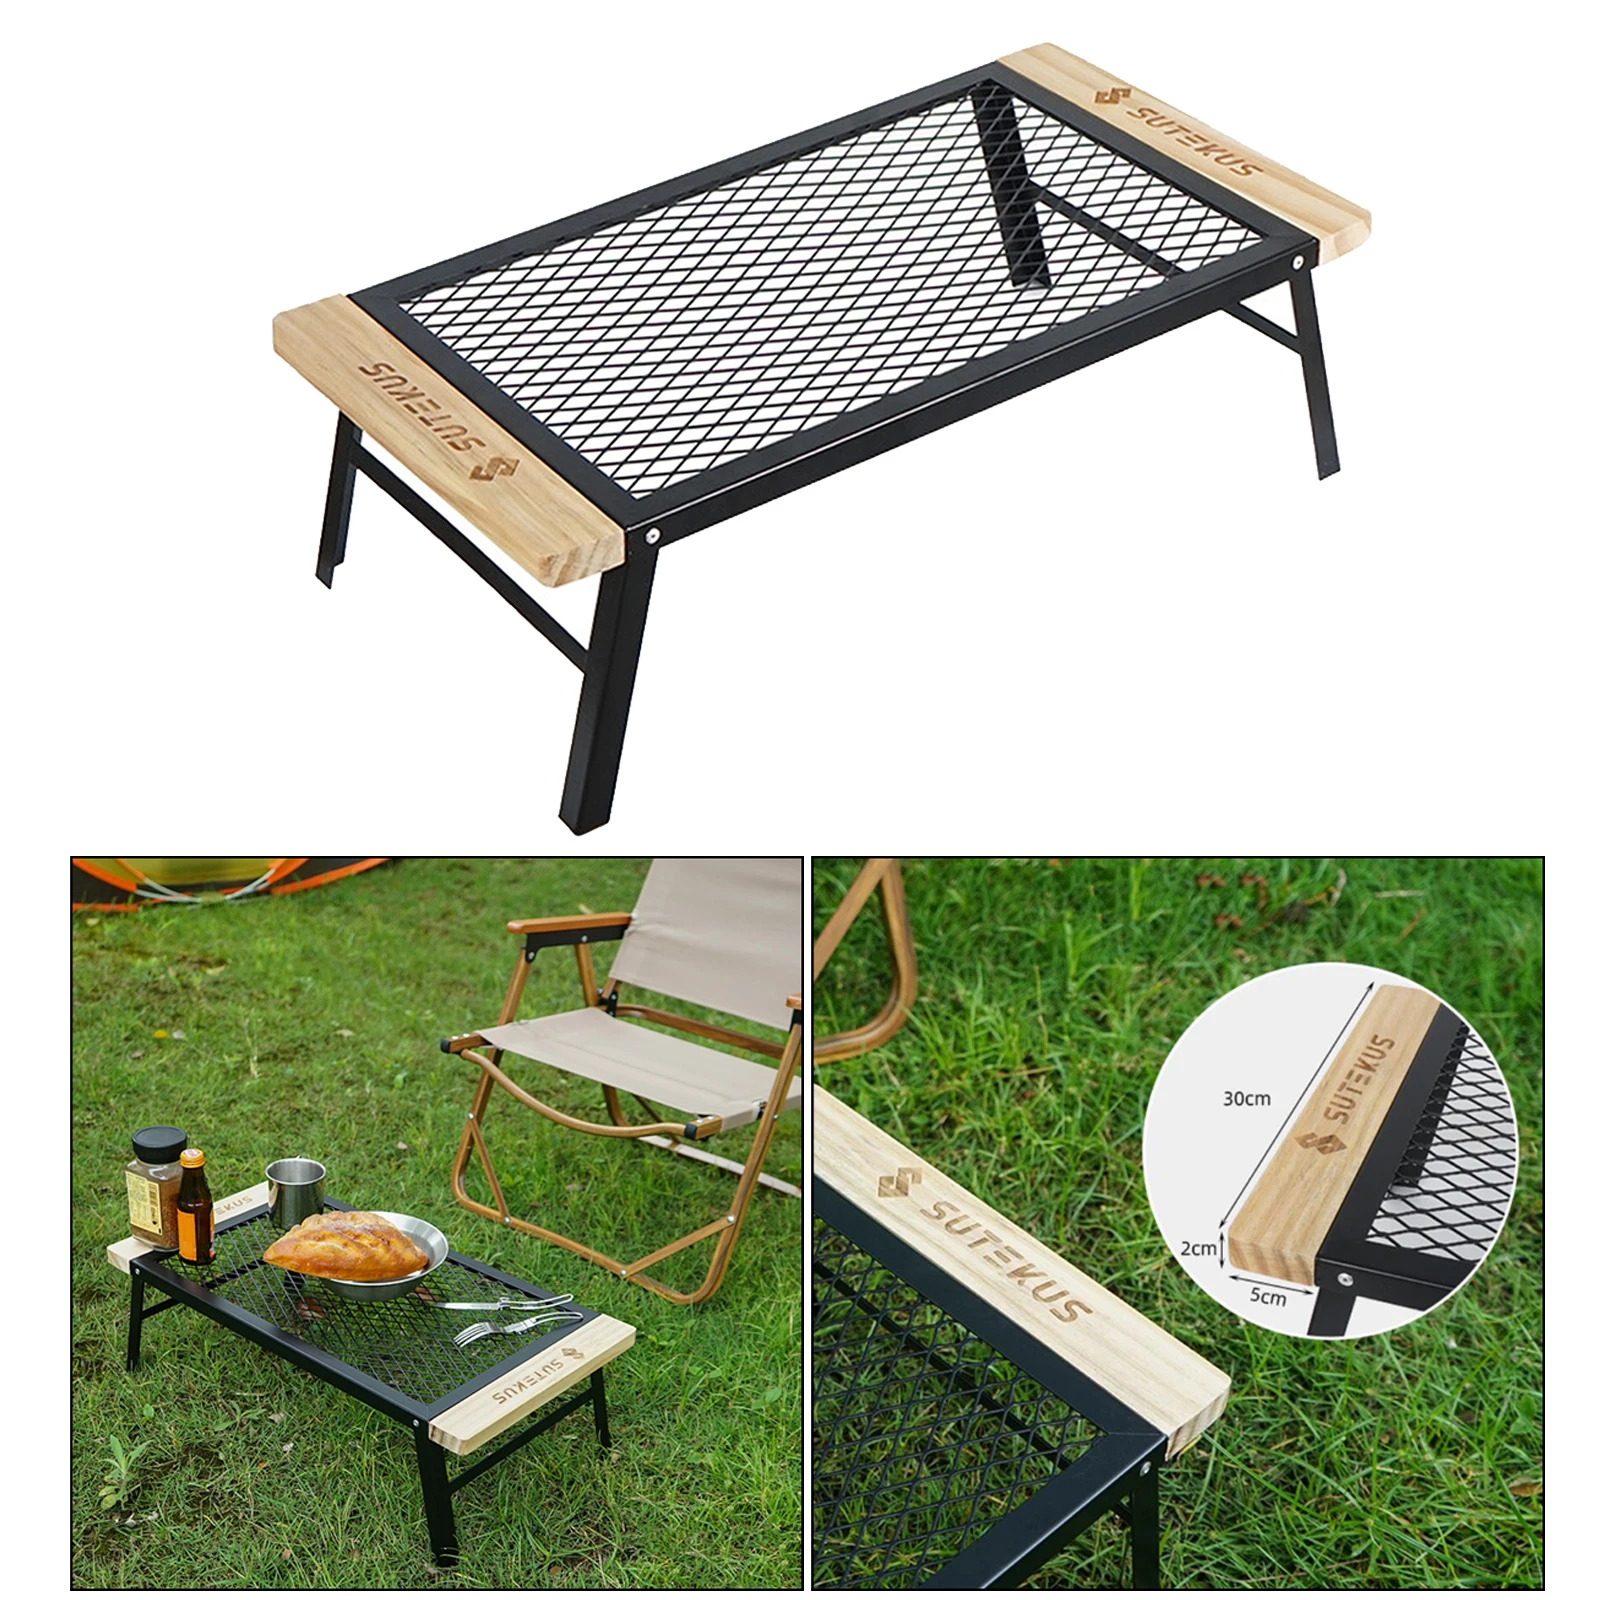 Iron Outdoor Folding Mini Net Table Camping BBQ Backyard Desk with Anti-Scald Wooden Handle